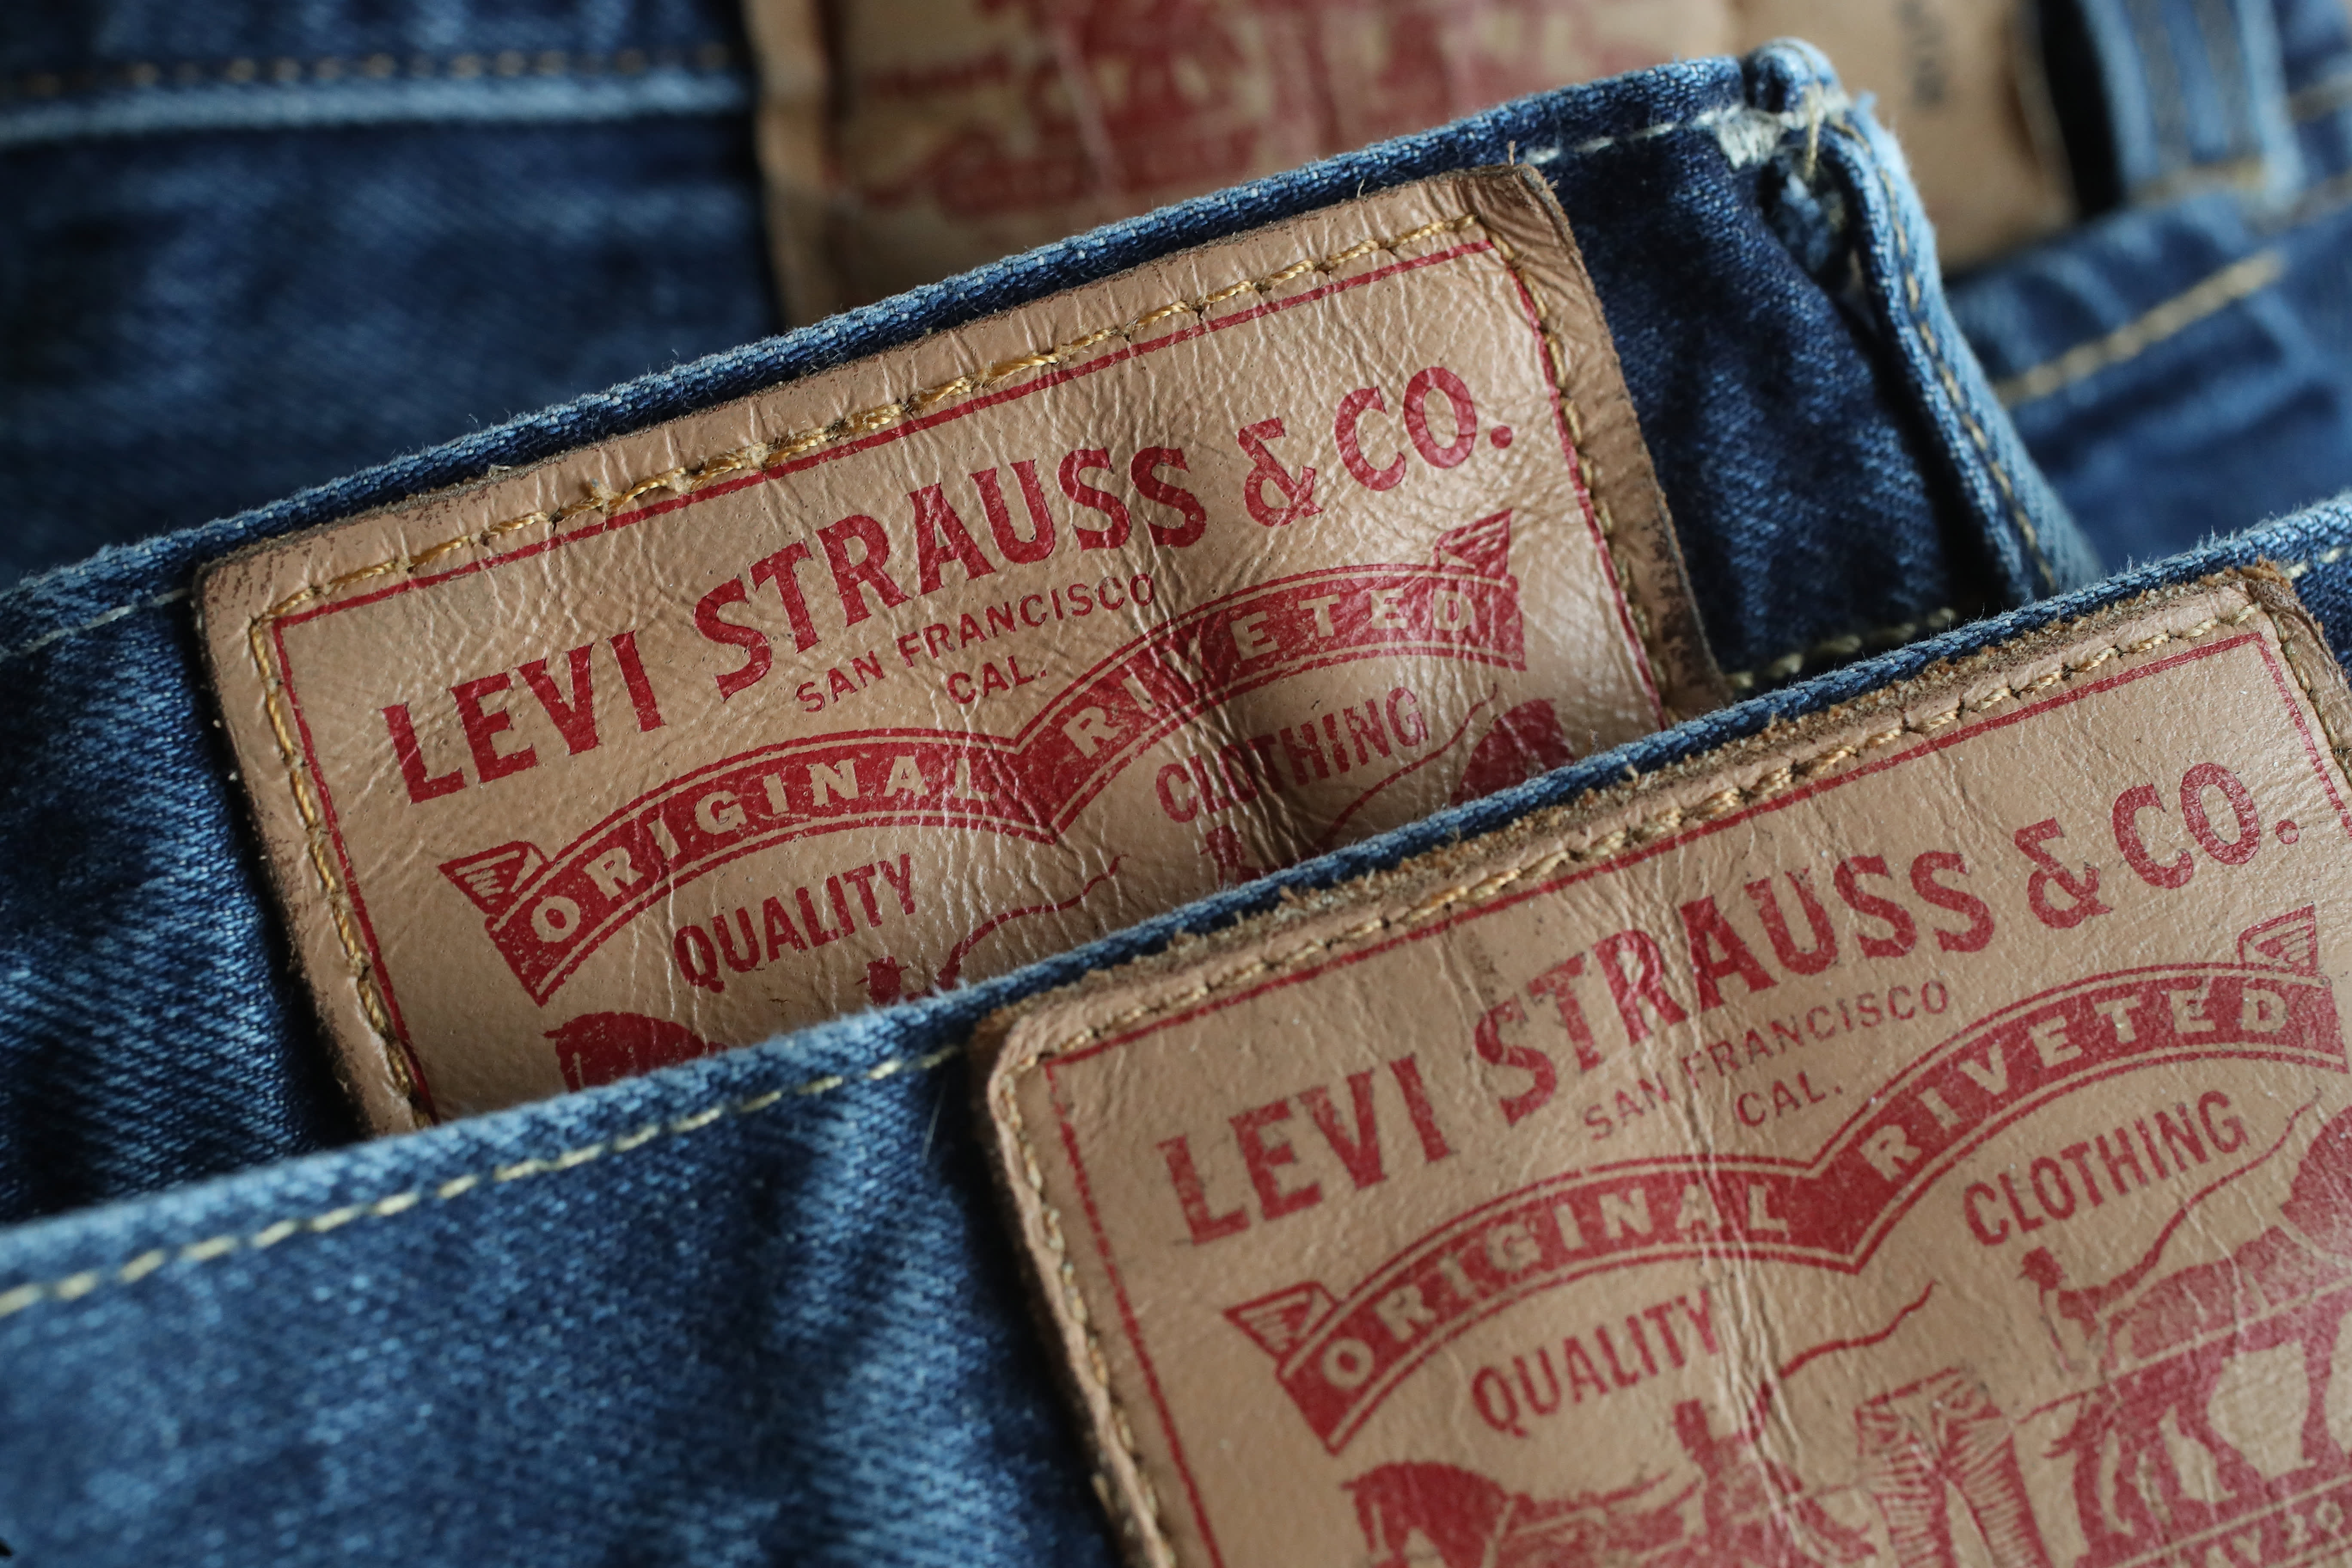 levi-strauss-ipo-seeing-high-demand-more-than-10-times-oversubscribed